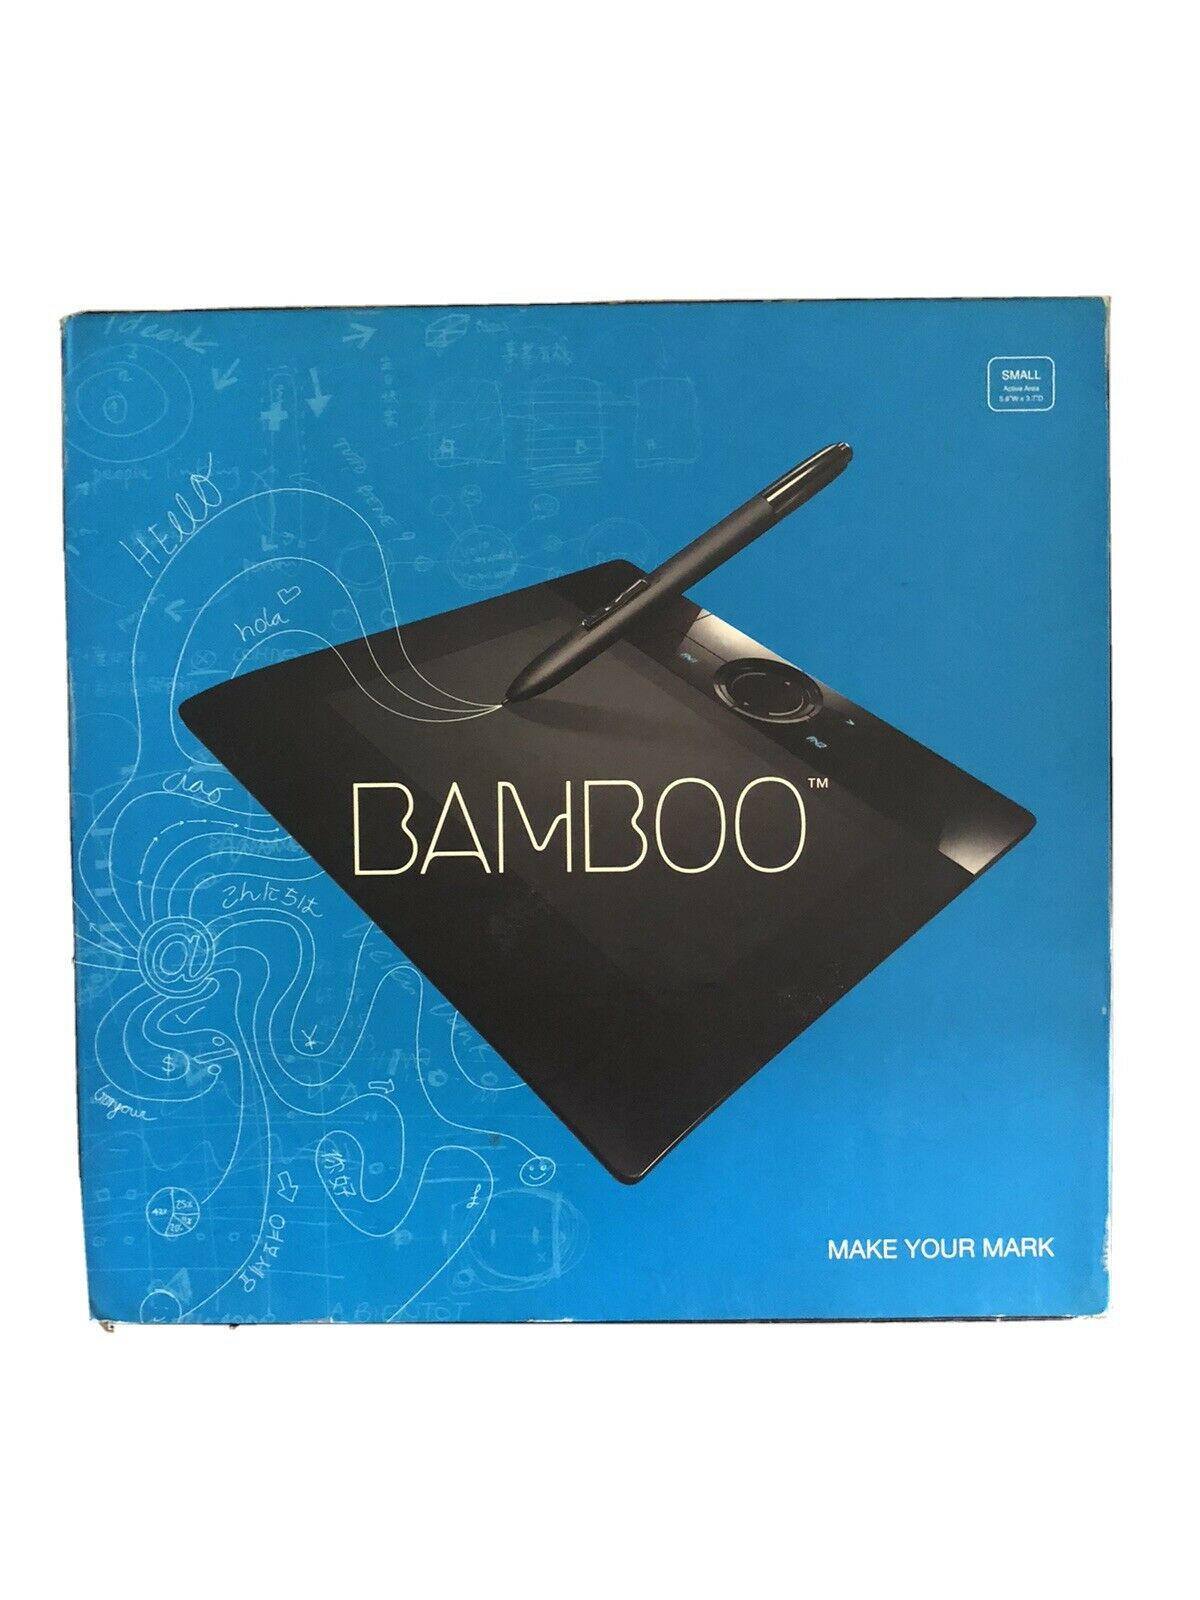 Wacom Bamboo Drawing Tablet Small MTE450 Works!